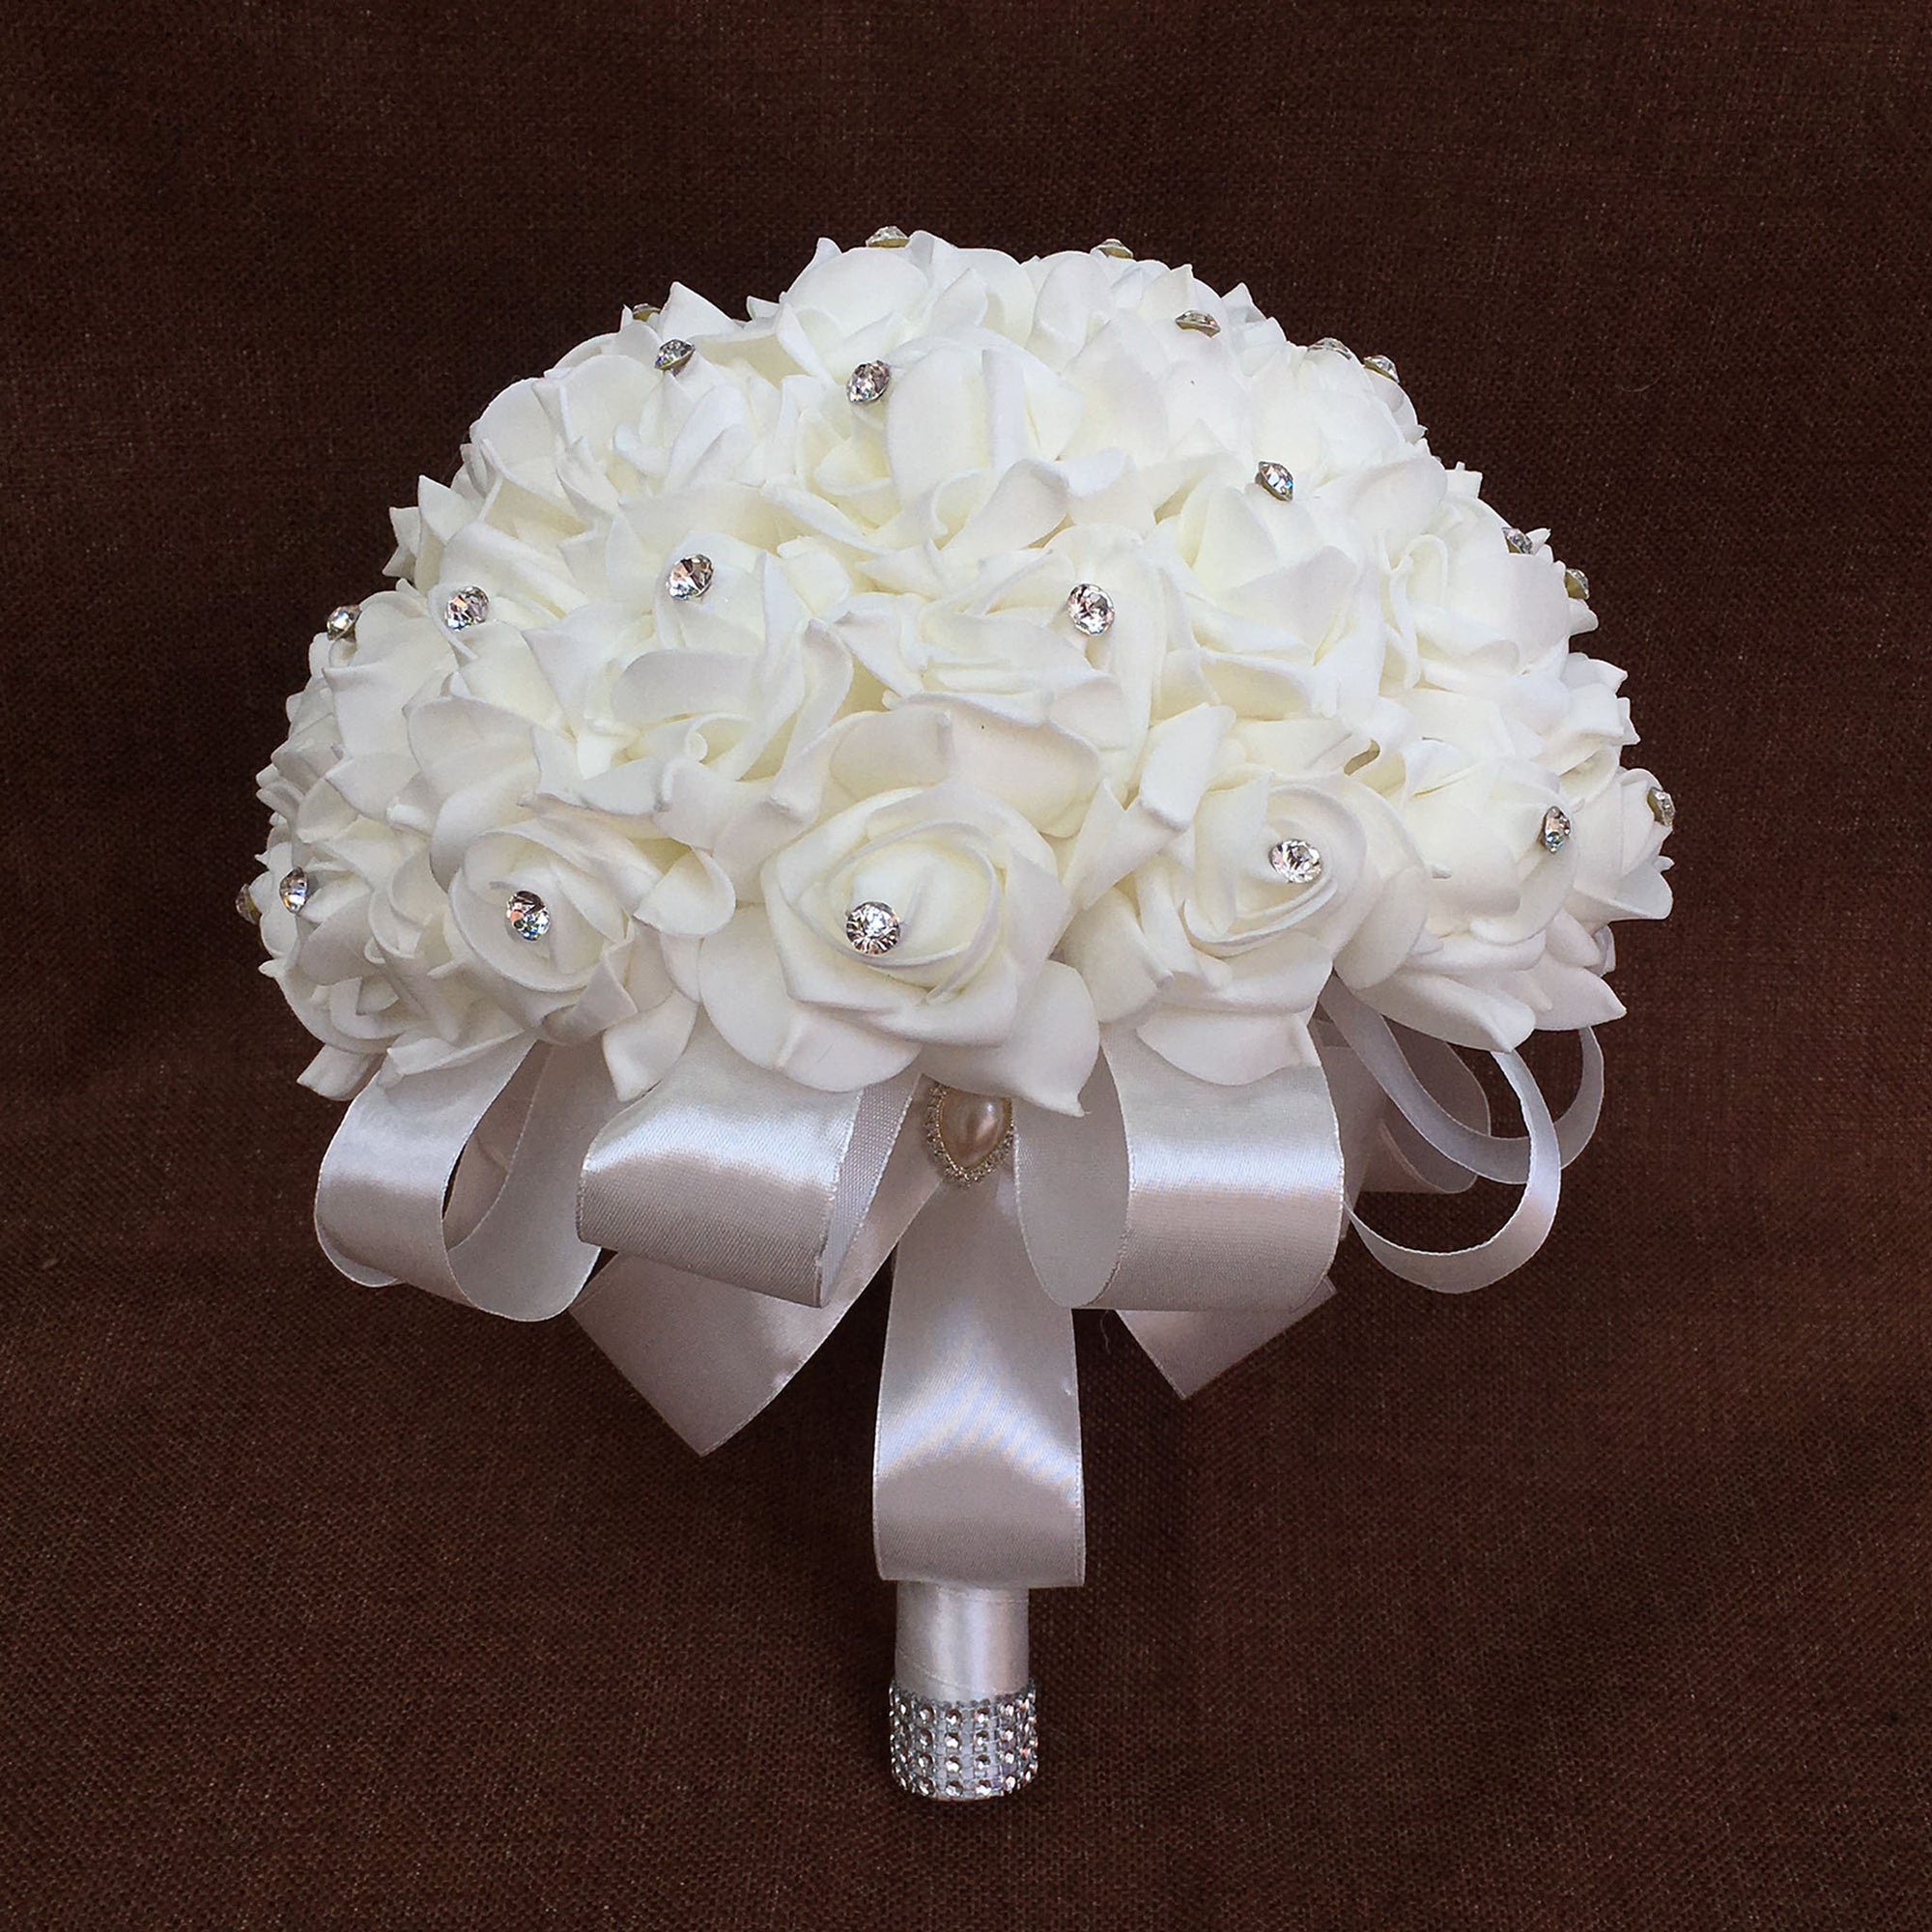 Flower Bouquet White Roses Wdding Bouquet Corsage Boutineer